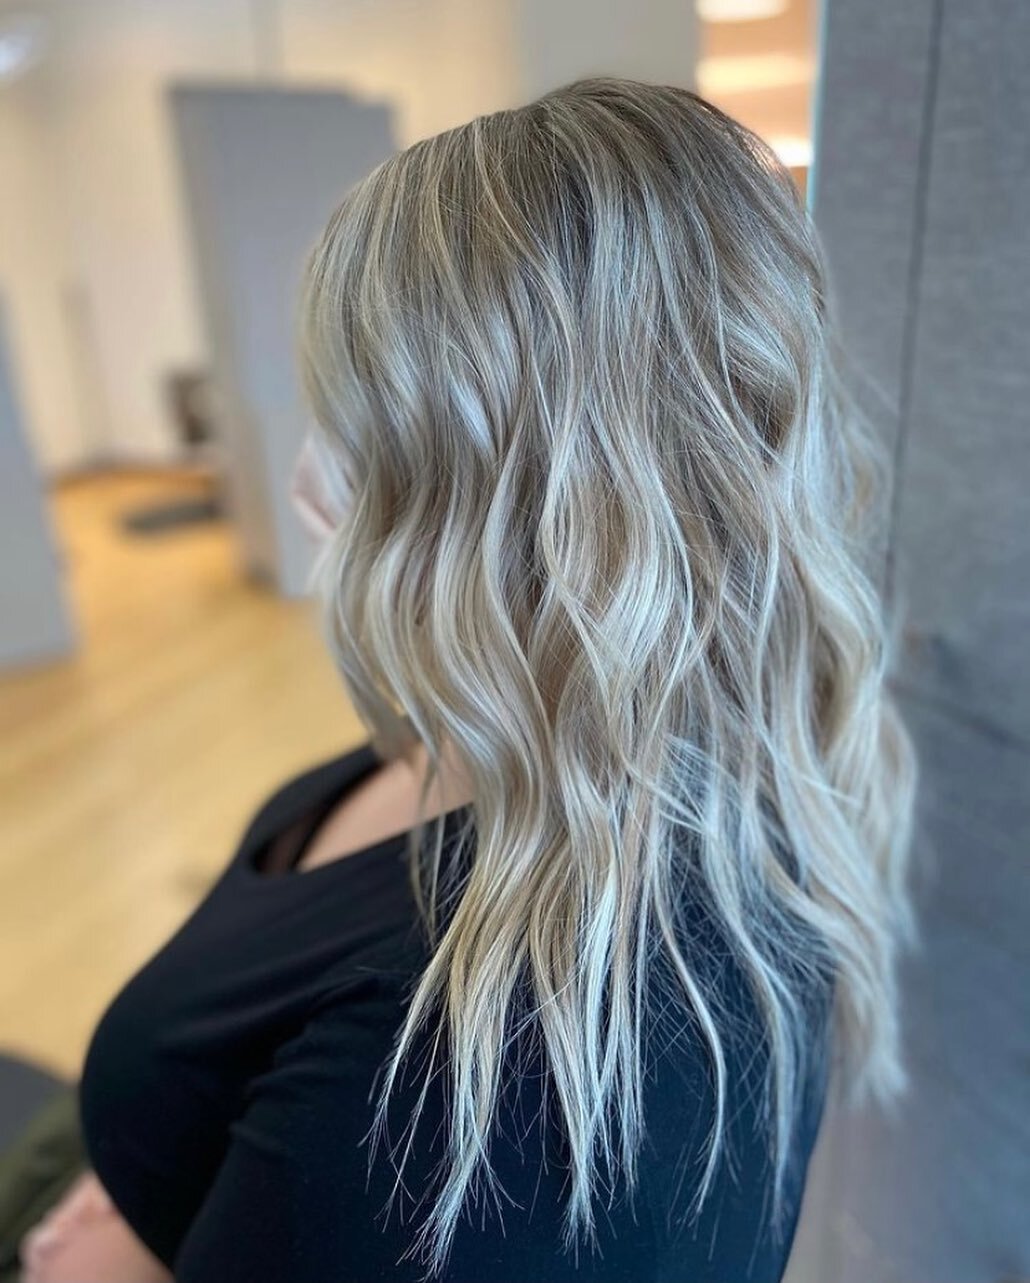 Bright and beautiful!!
Hair by Lyndse ( @blush_bobbypins )
#blondegirl #instahair #foilayage #mastersofbalayage #balayageartists #licensedtocreate #hairoftheday #haircolorist #colormelt #healthyhair #balayagespecialist #hairextensions #balayagedandpa